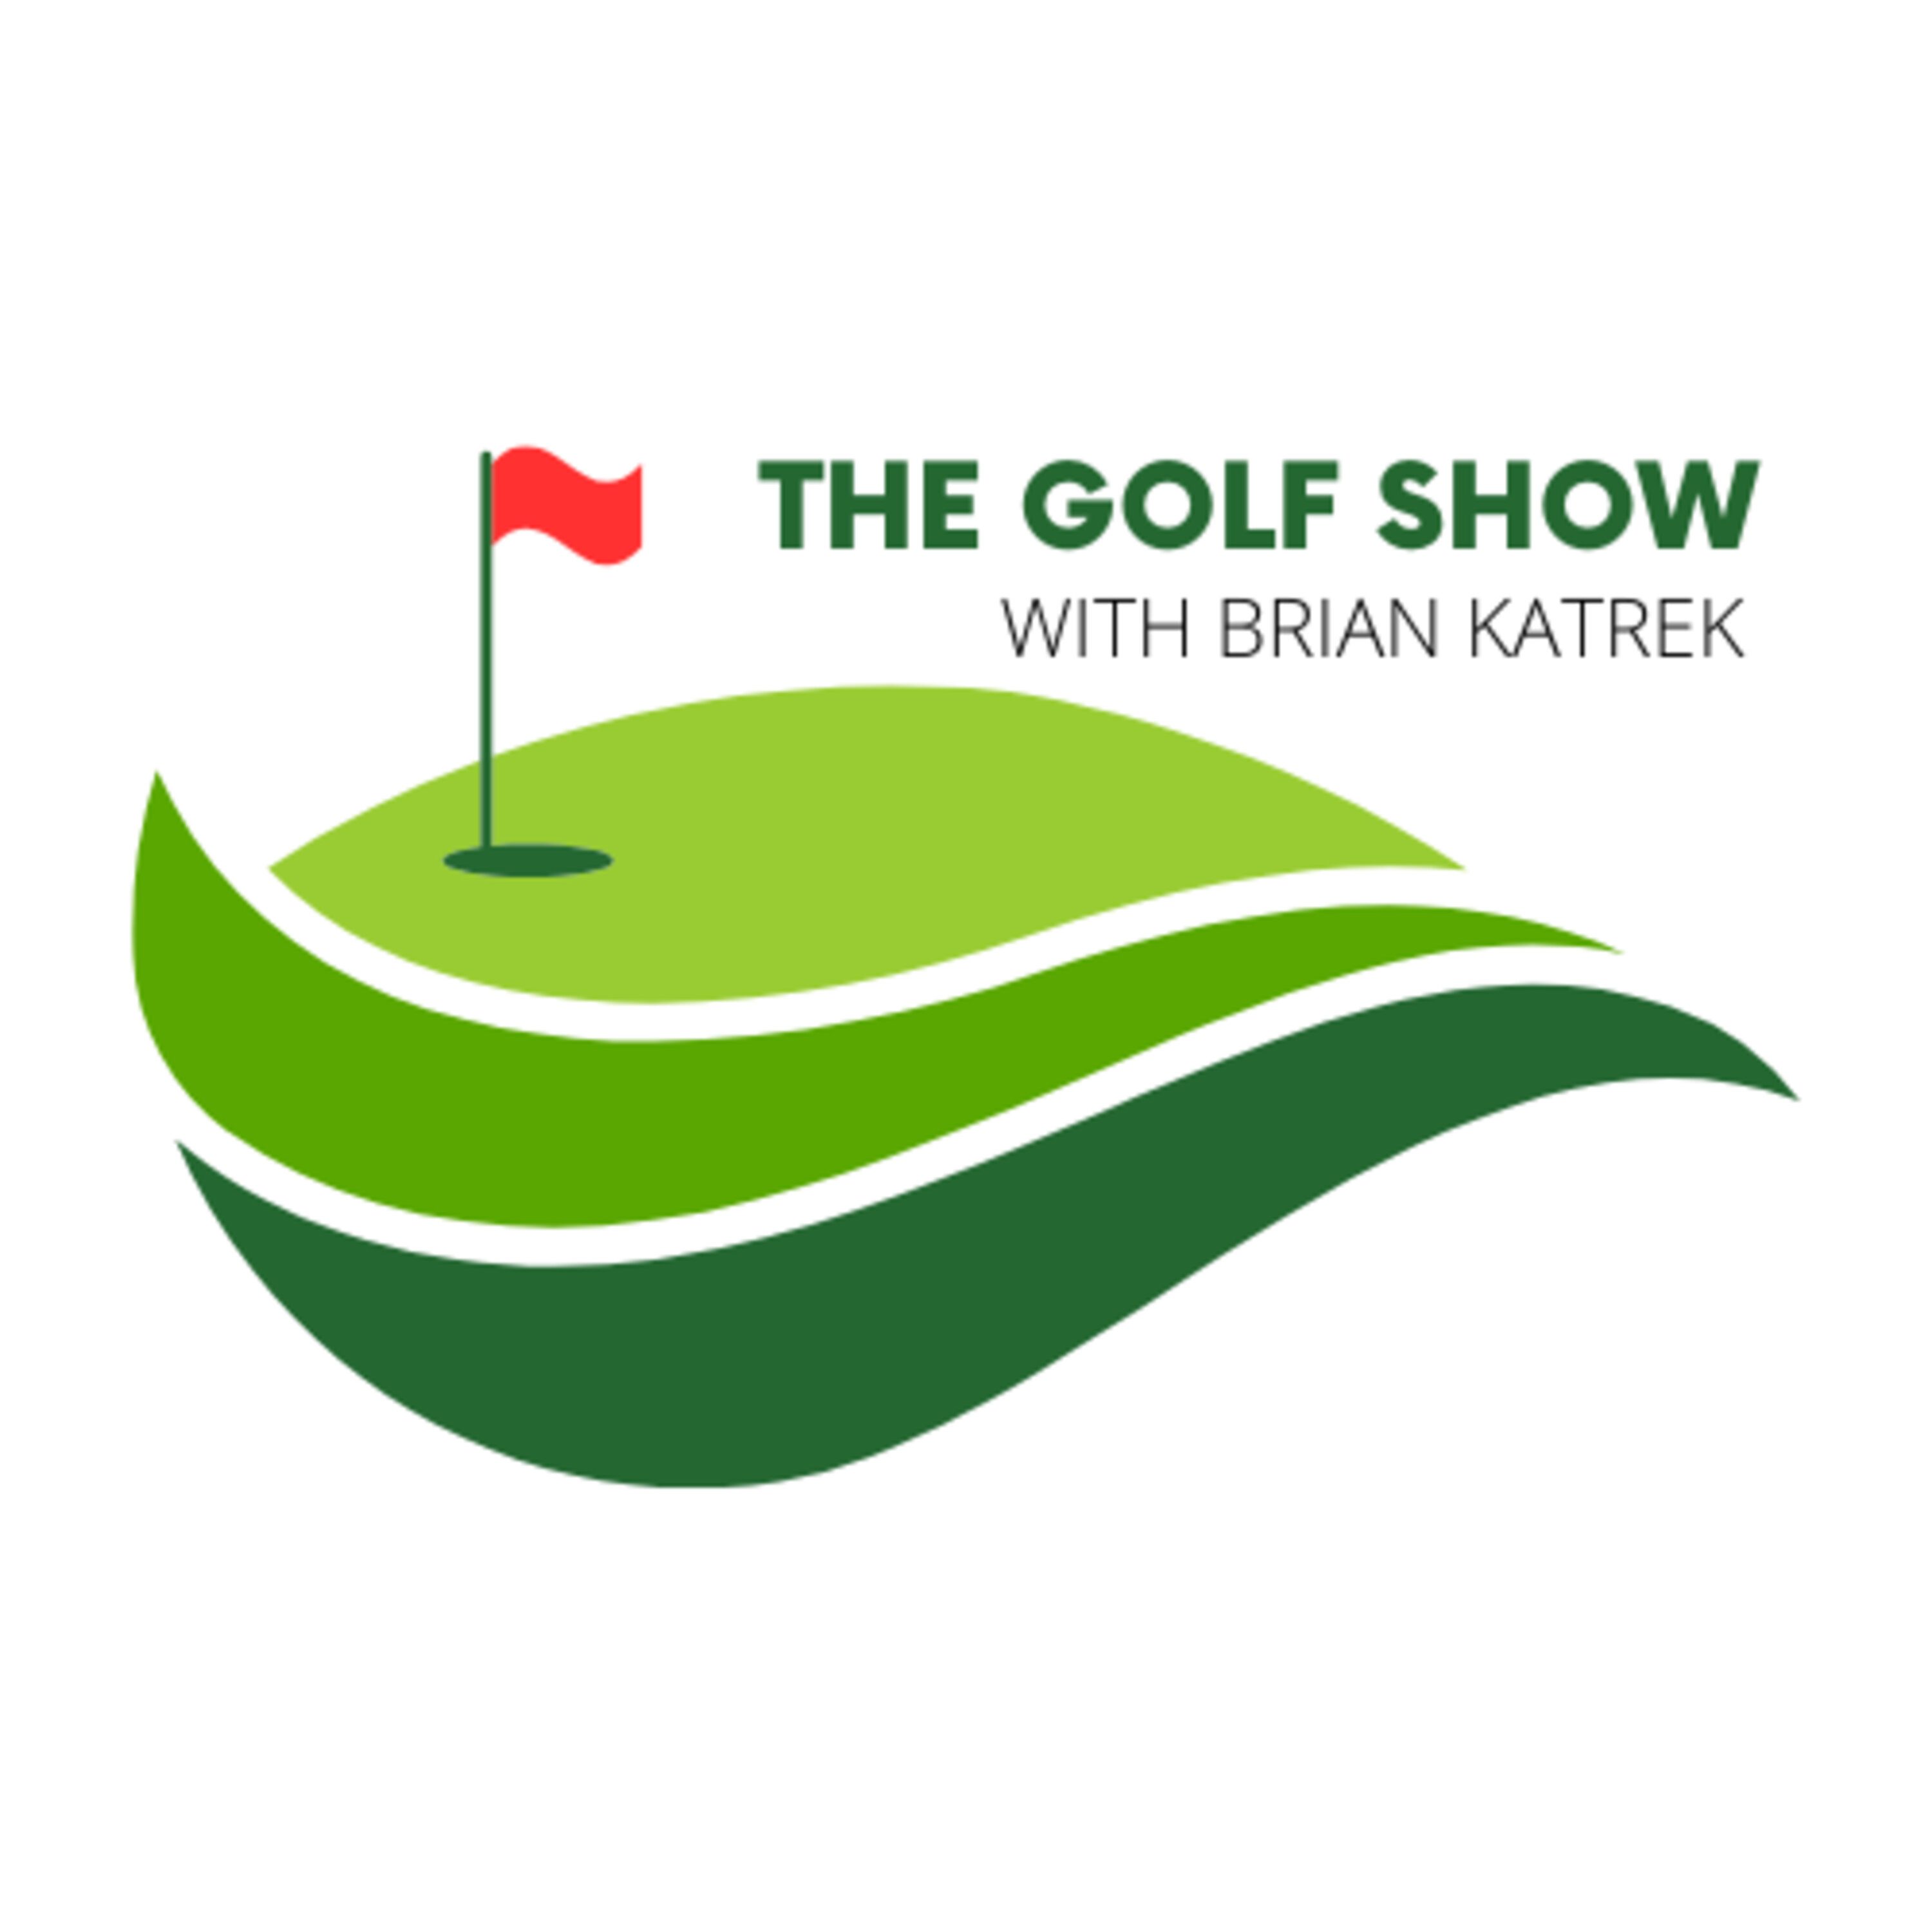 The Golf Show (10-31-21) World Series Edition